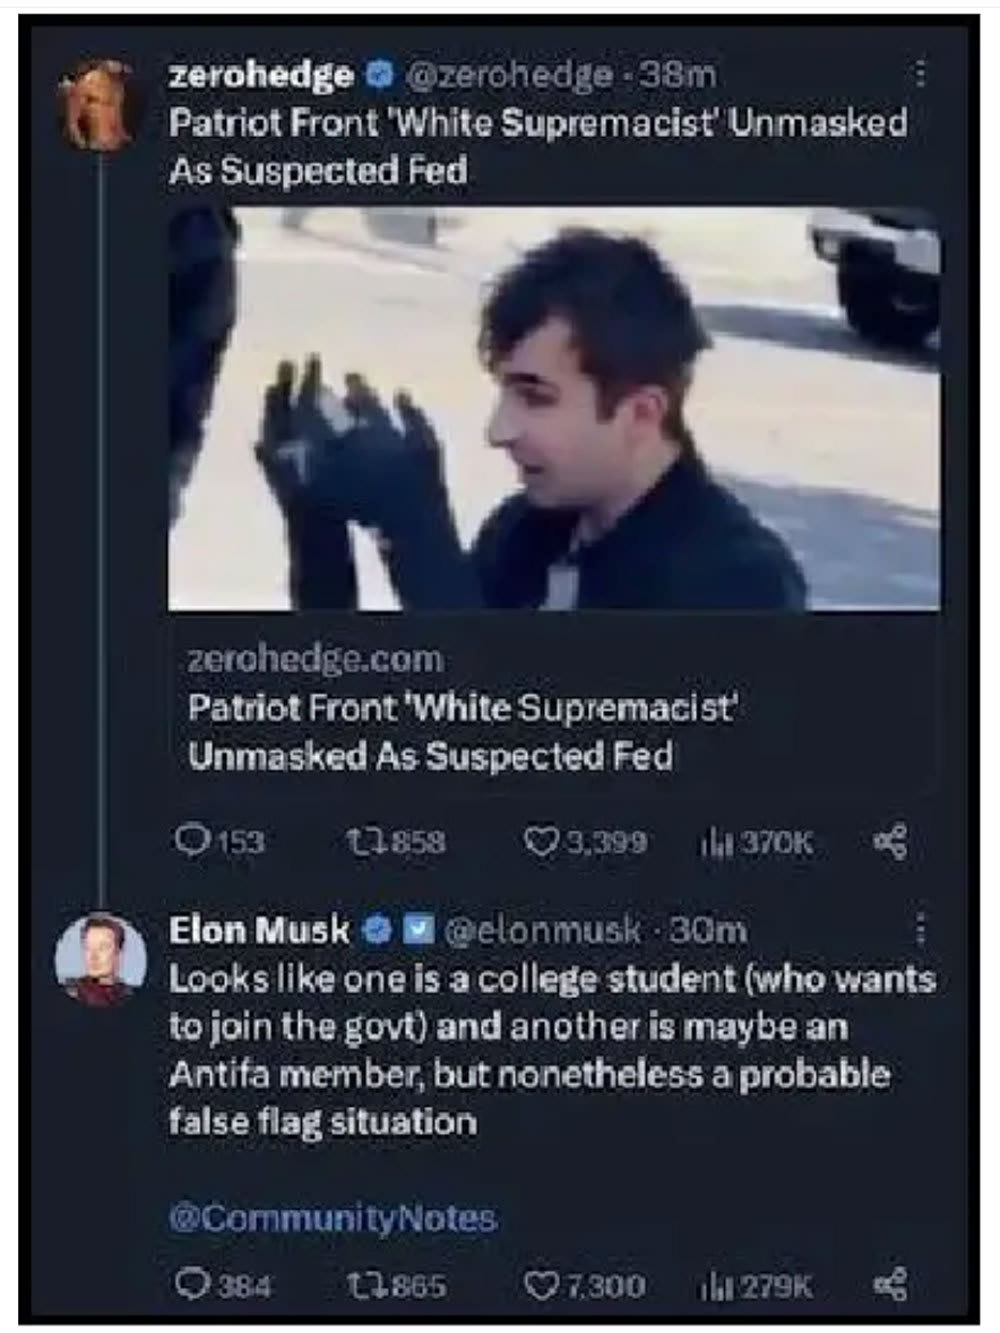 Screenshot of interaction on Twitter/X with Elon Musk and ZeroHedge.